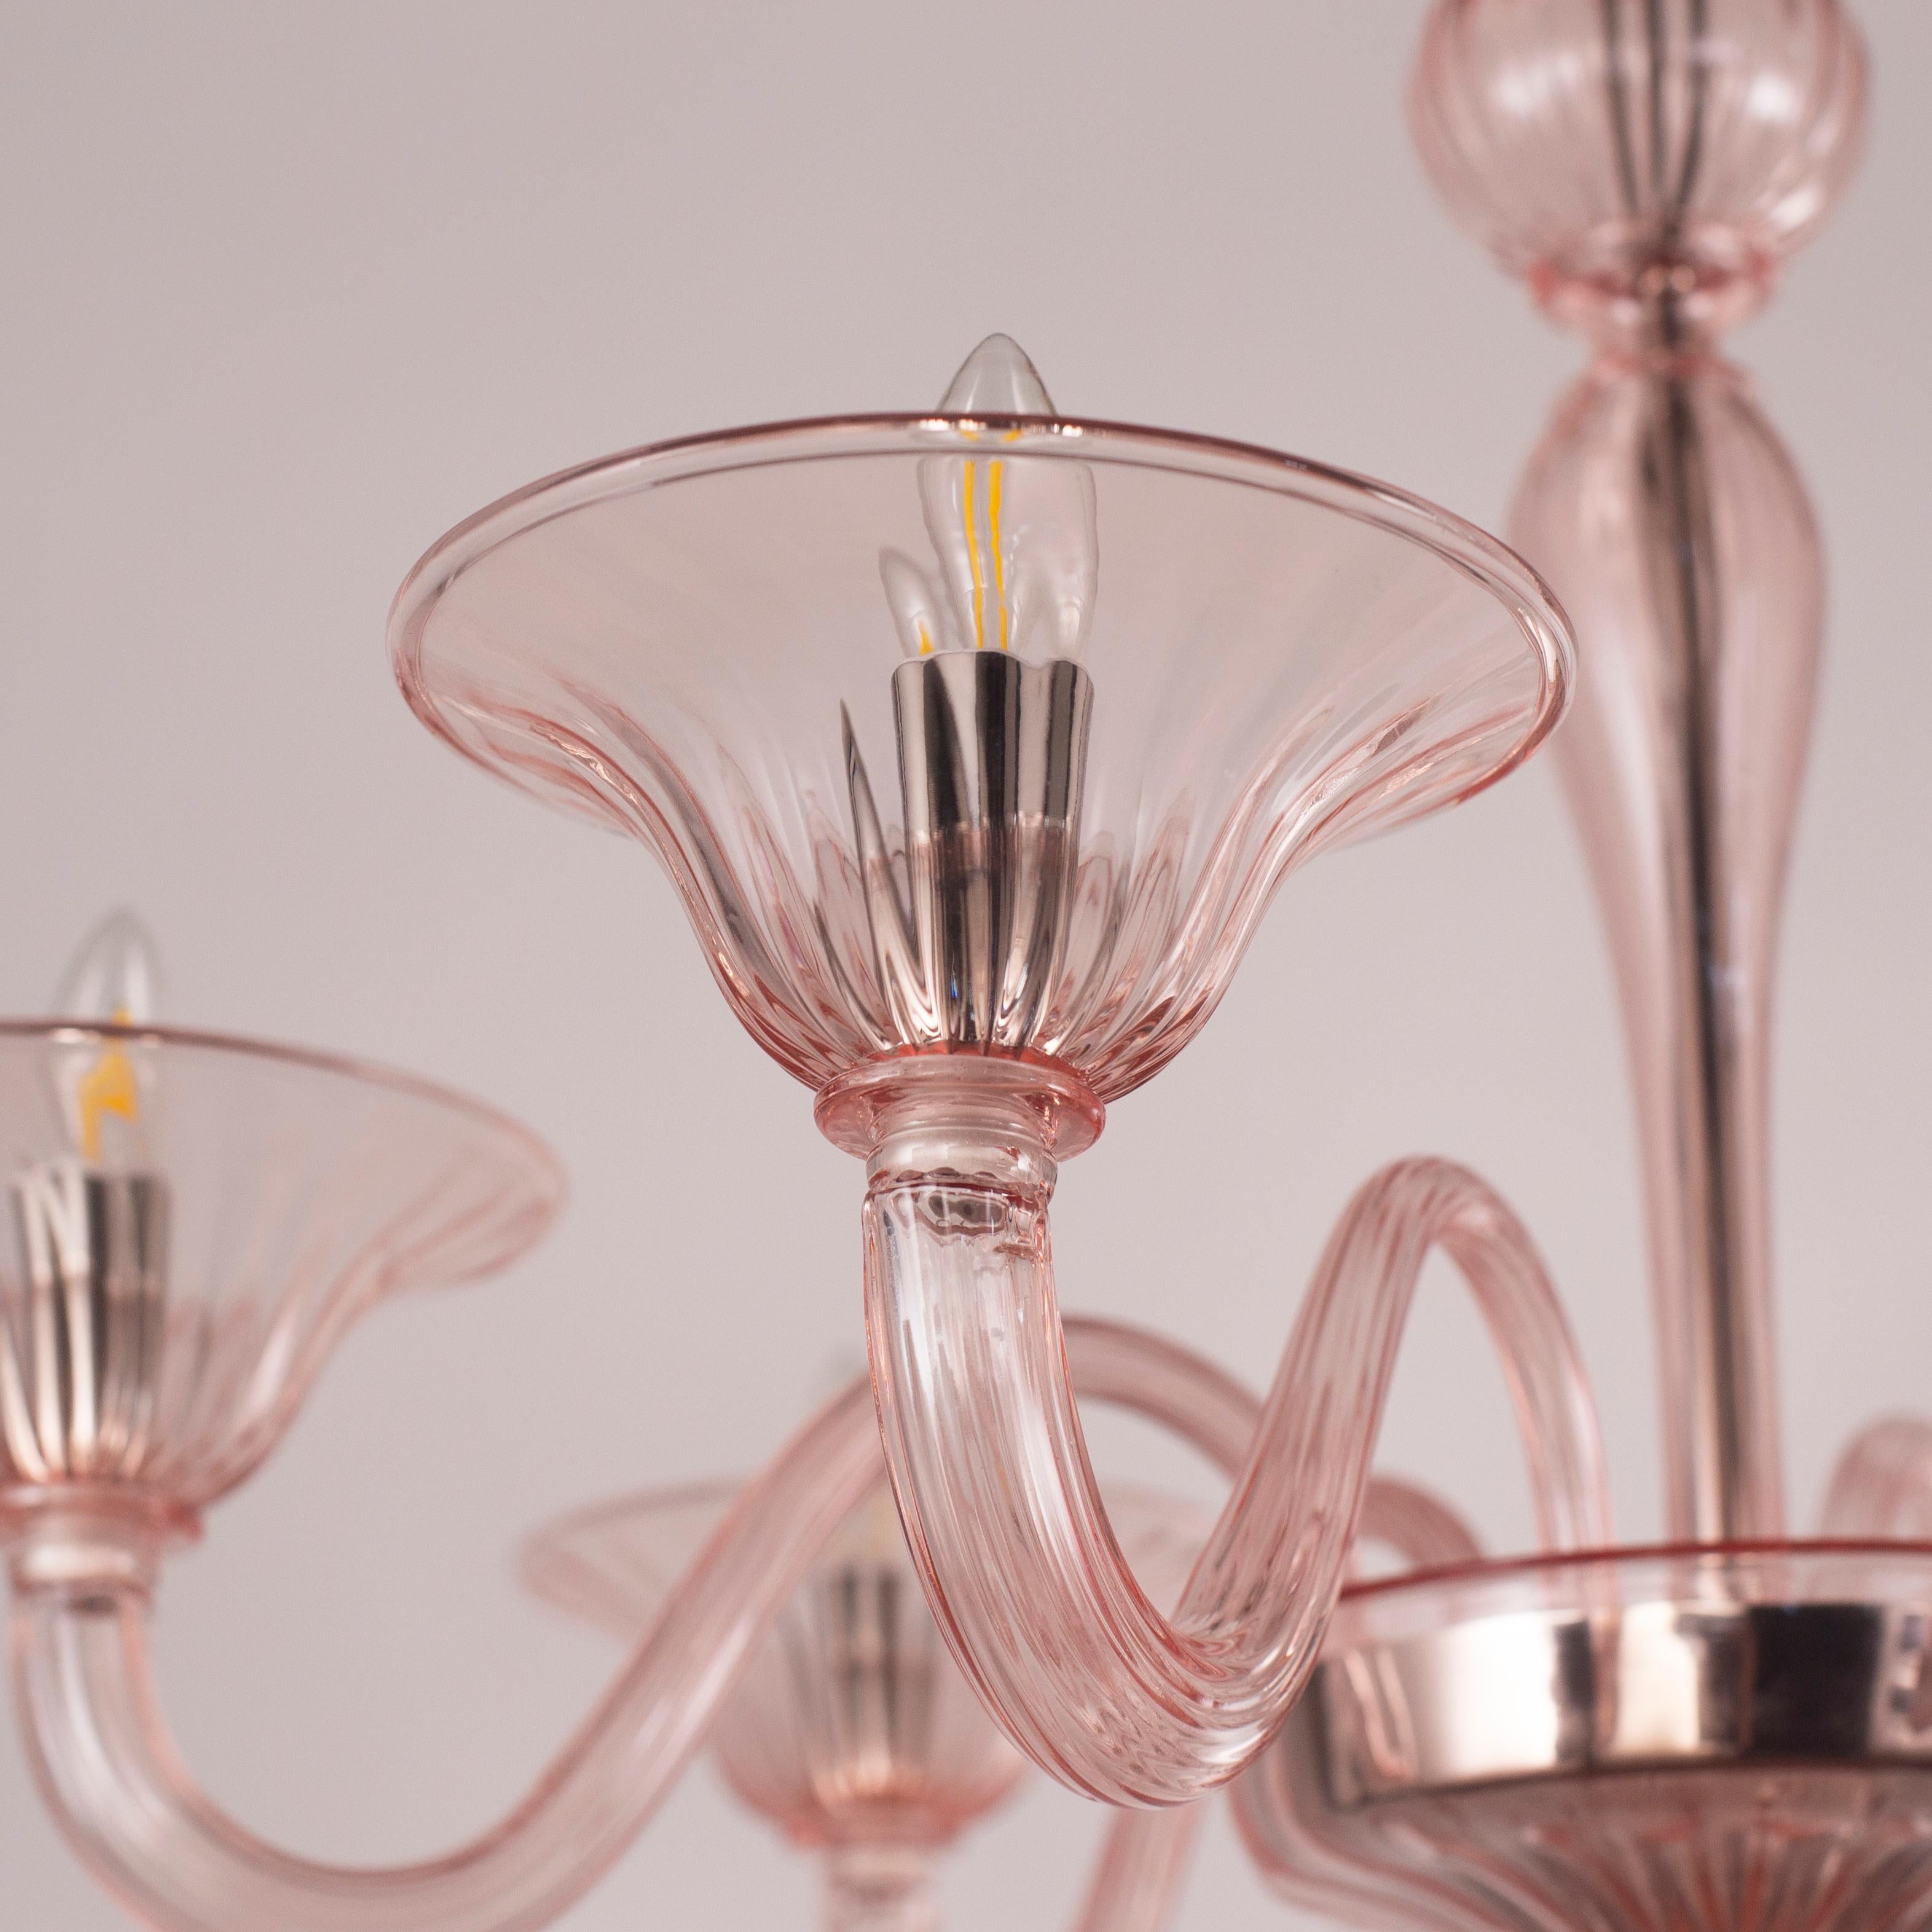 Simplicissimus 360 chandelier, 6 lights, Powder Pink artistic glass by Multiforme
This collection in Murano glass is characterized by superb simplicity. It is the result of a research which harks back to the Classic Murano chandeliers with the